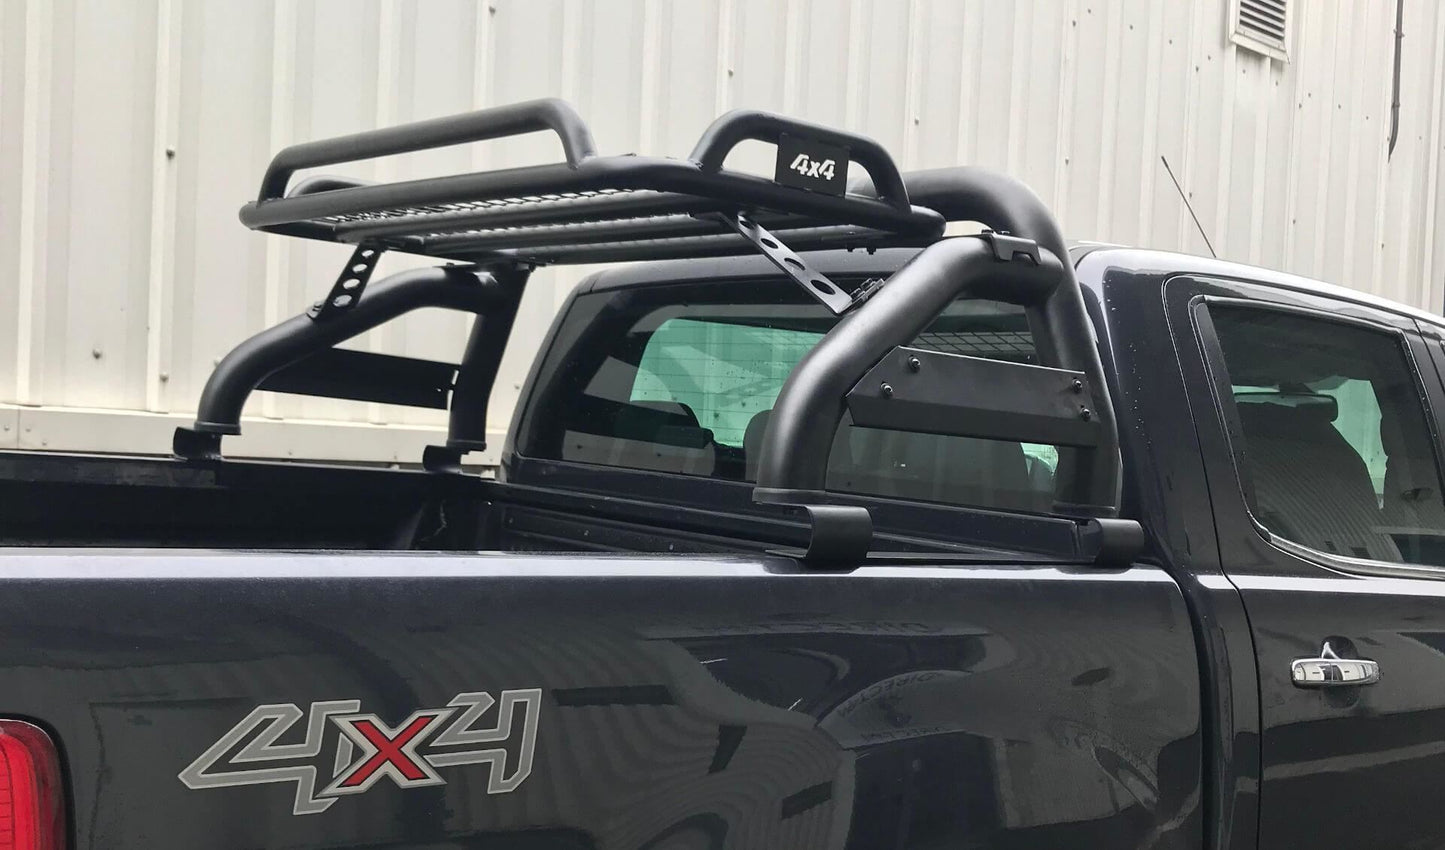 Black SUS201 Short Arm Roll Bar with Cargo Basket Rack for the Ford Ranger 06-12